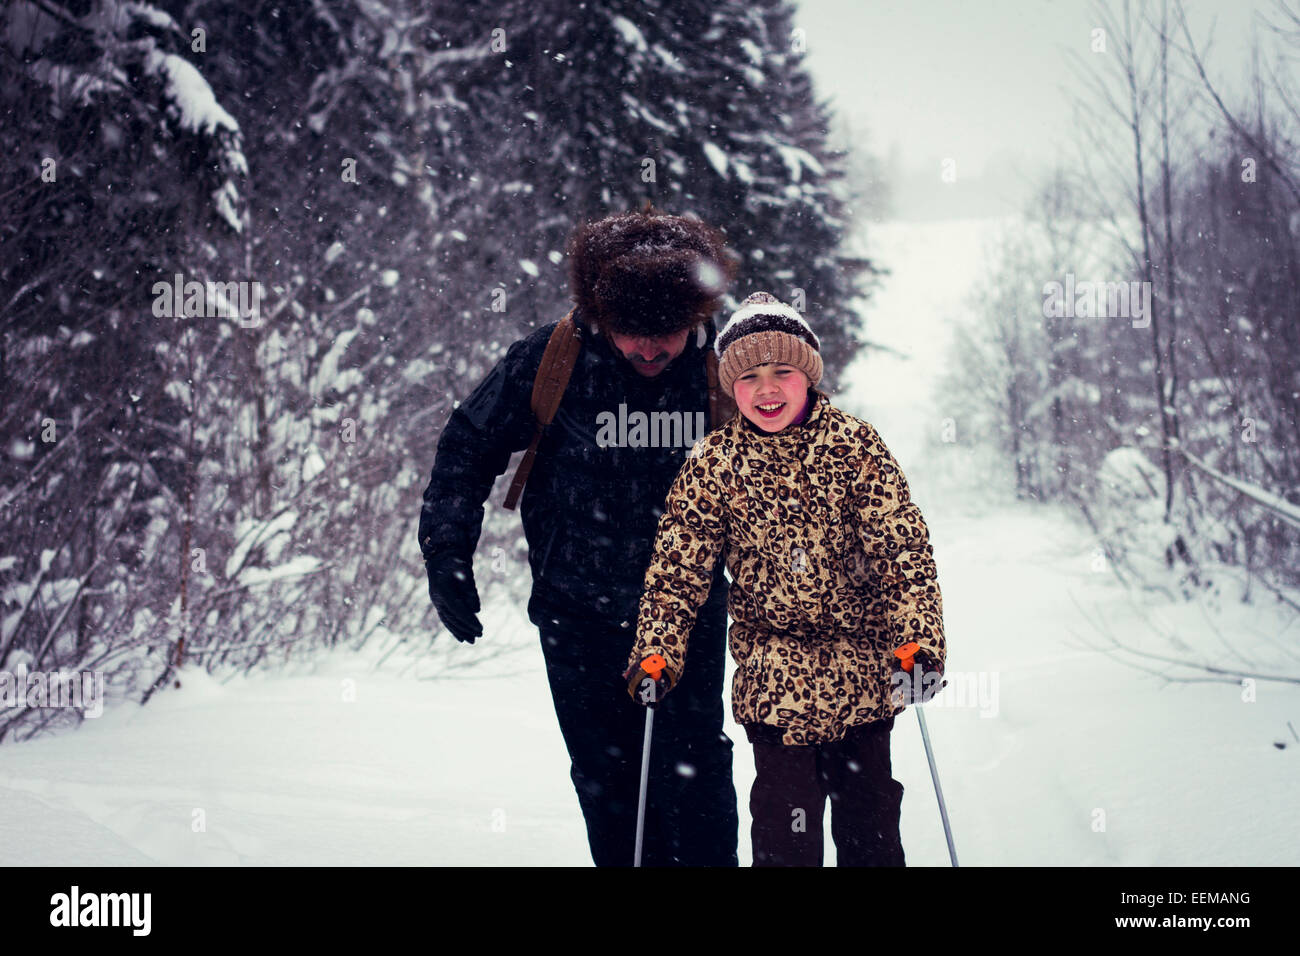 Caucasian father and daughter cross-country skiing on snowy road Stock Photo